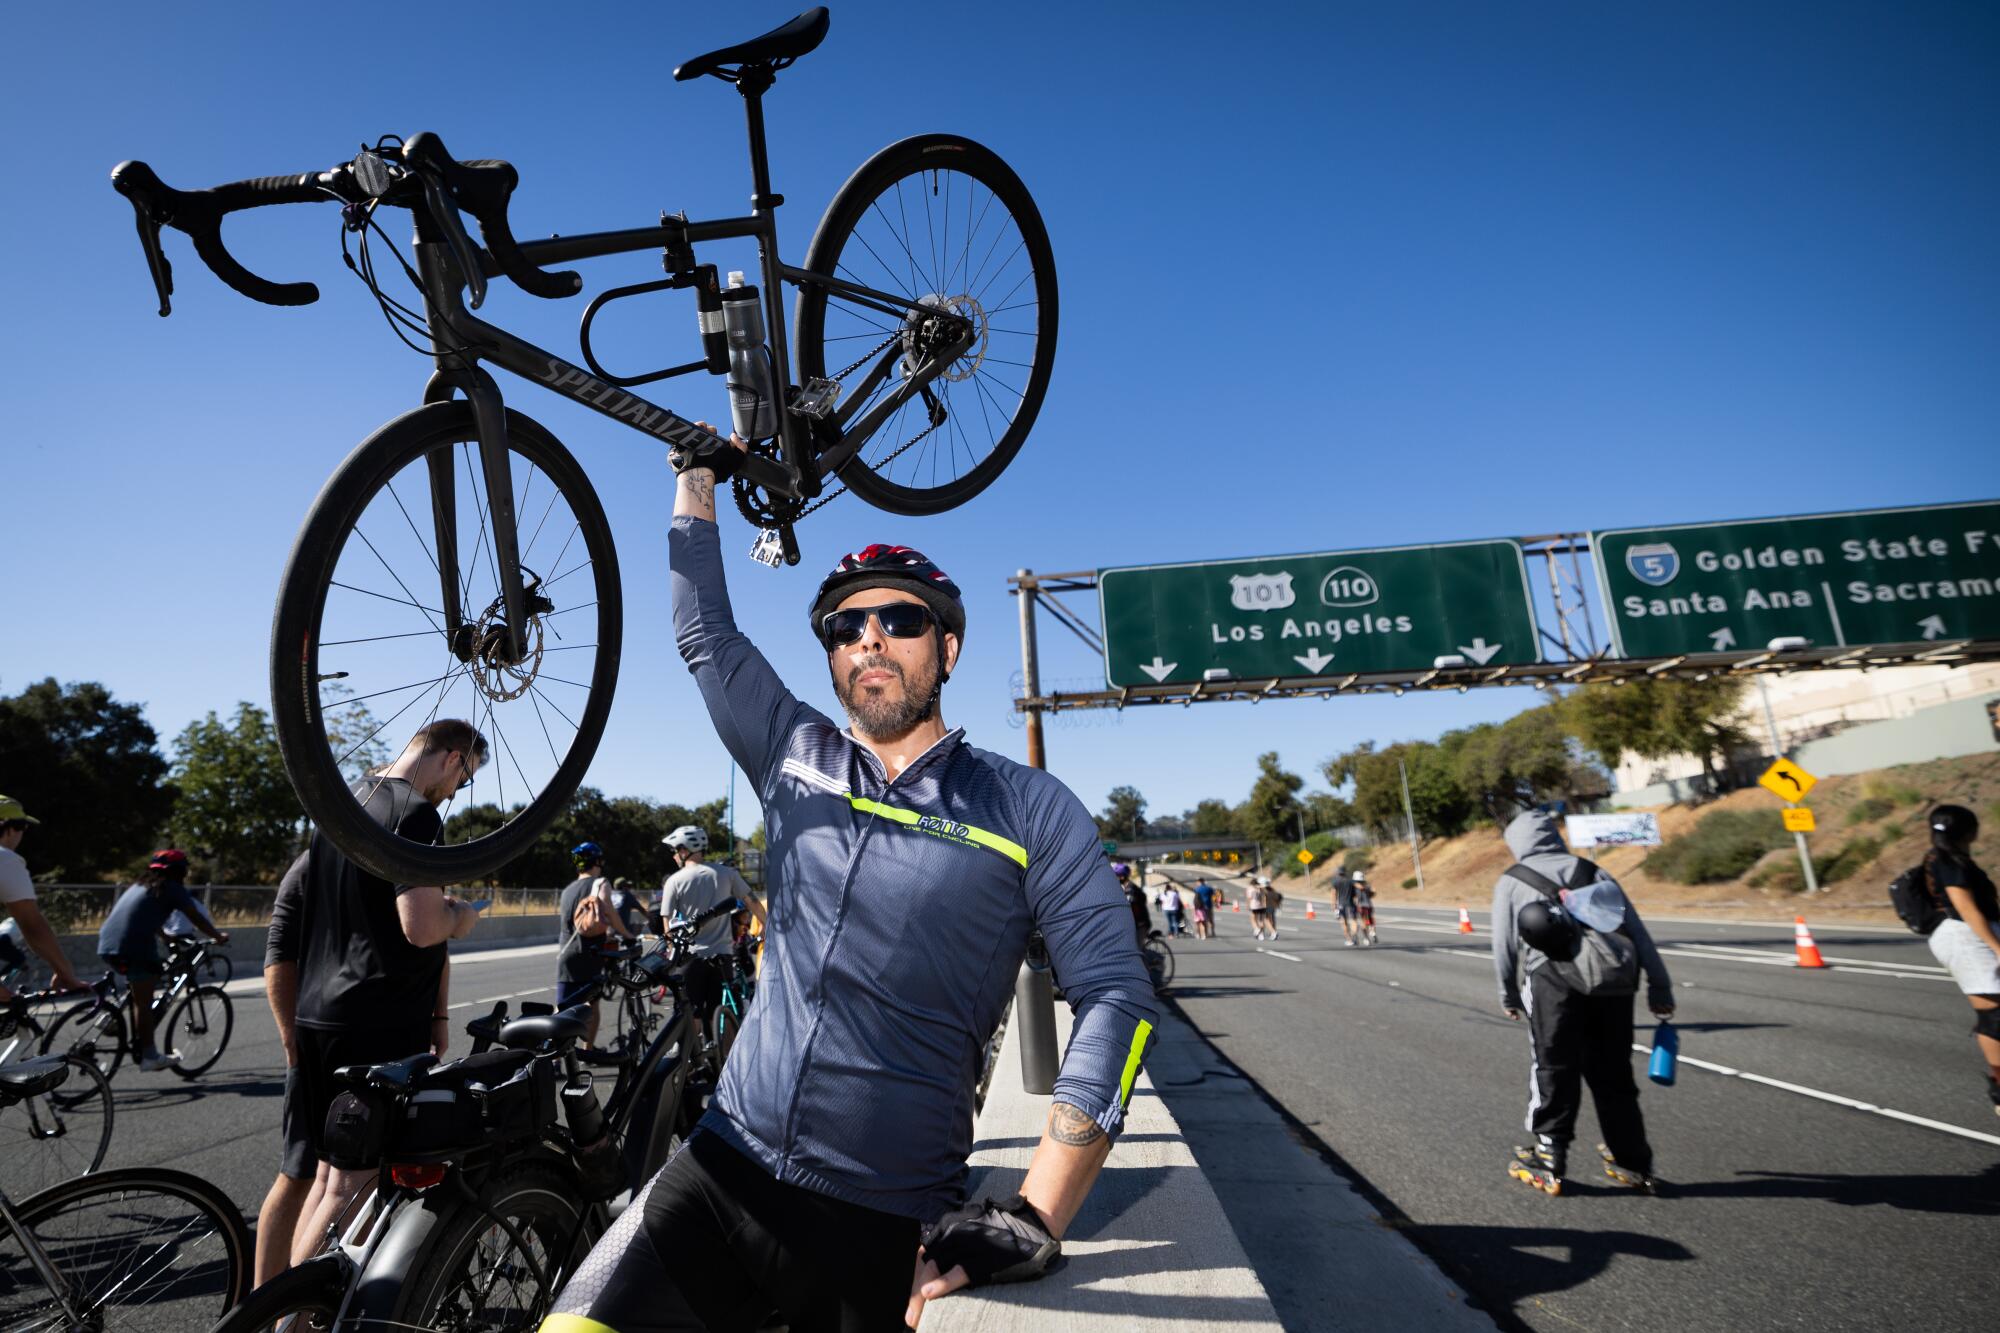 LDiego Chavez, of Wilmington, hoists his bike while taking a break in the middle of the 110 Freeway.